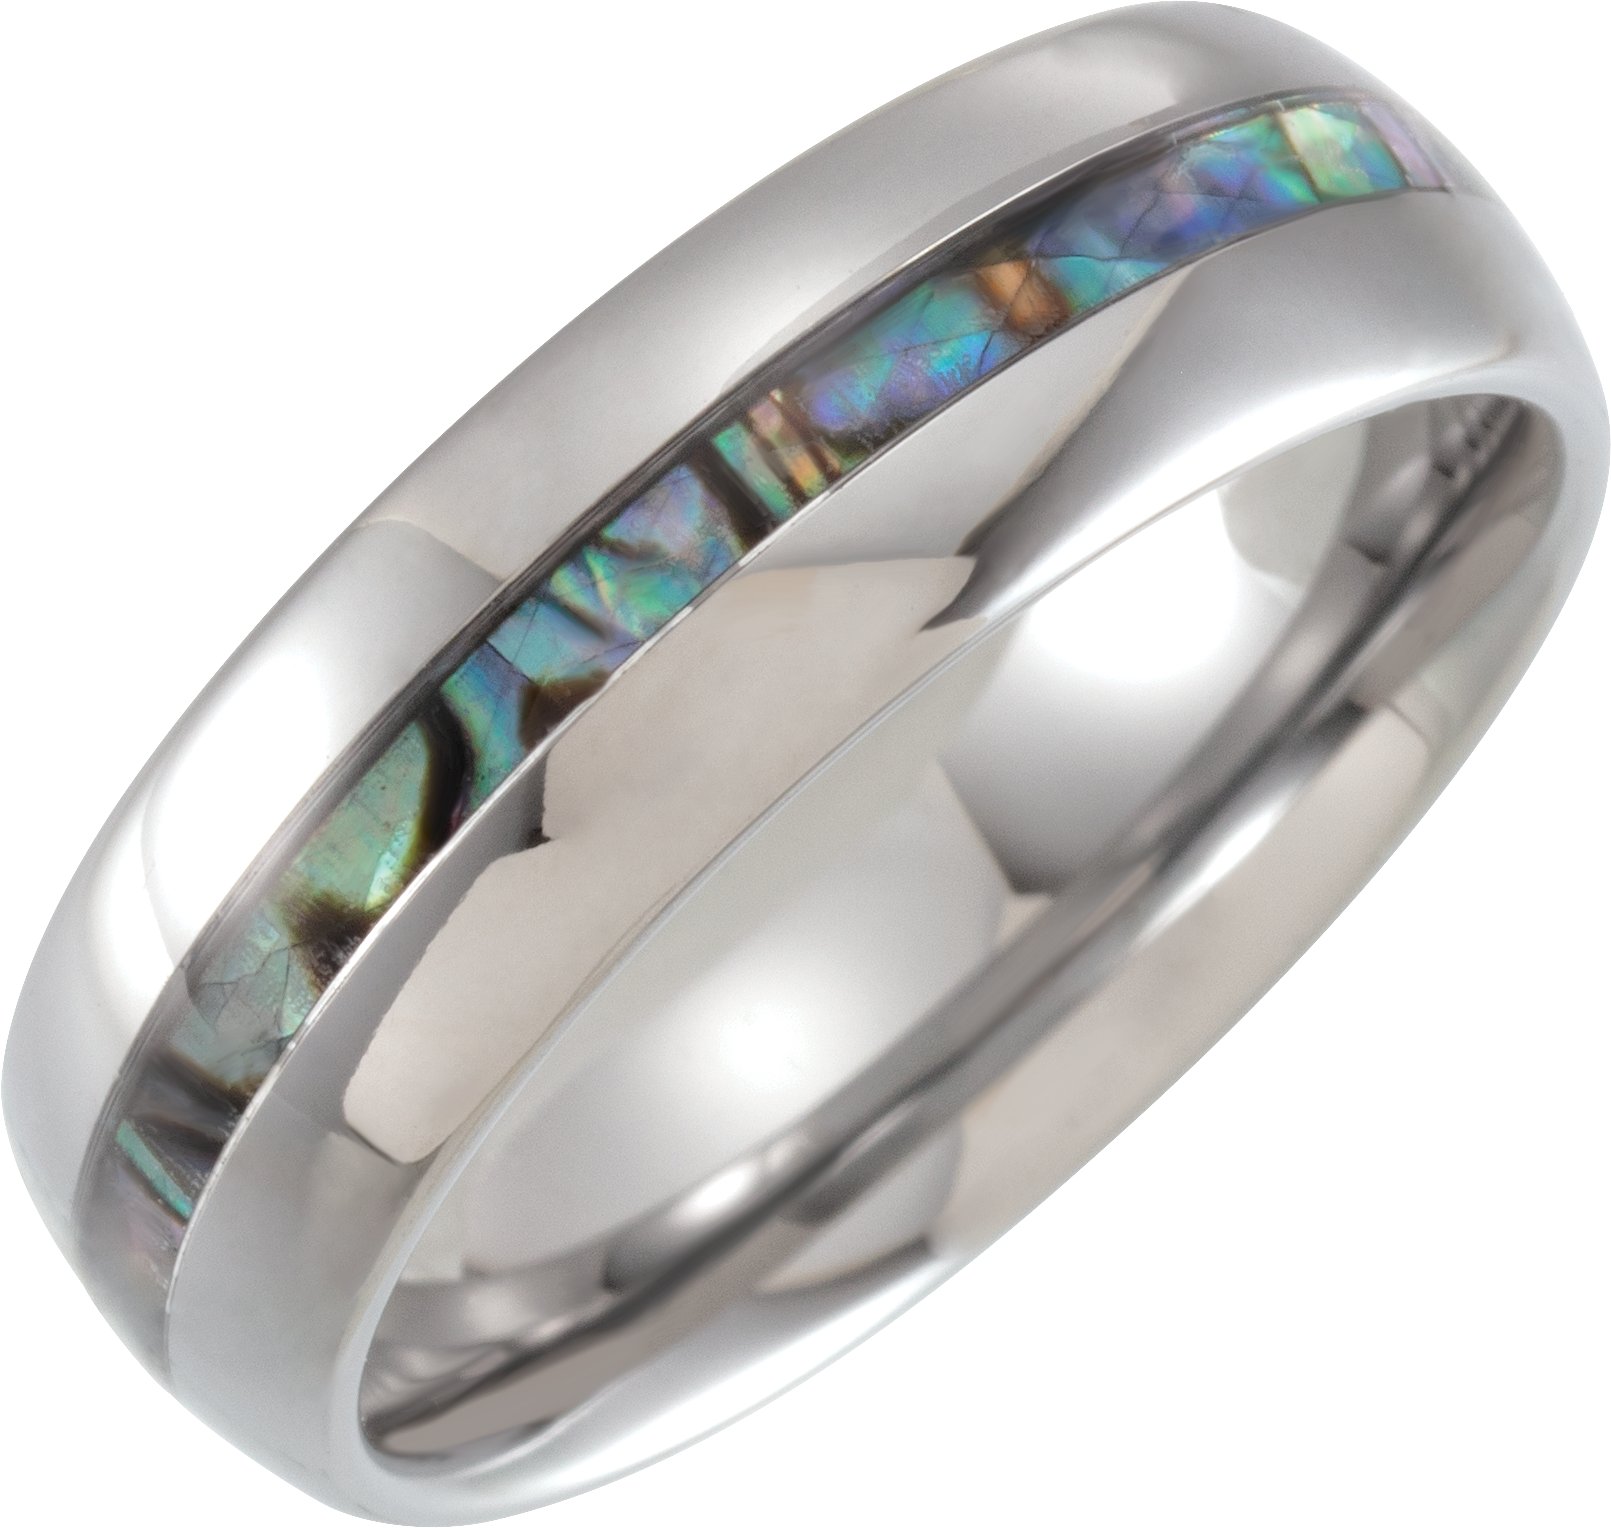 Tungsten 8 mm Half Round Band with Pearl Shell Inlay Size 11